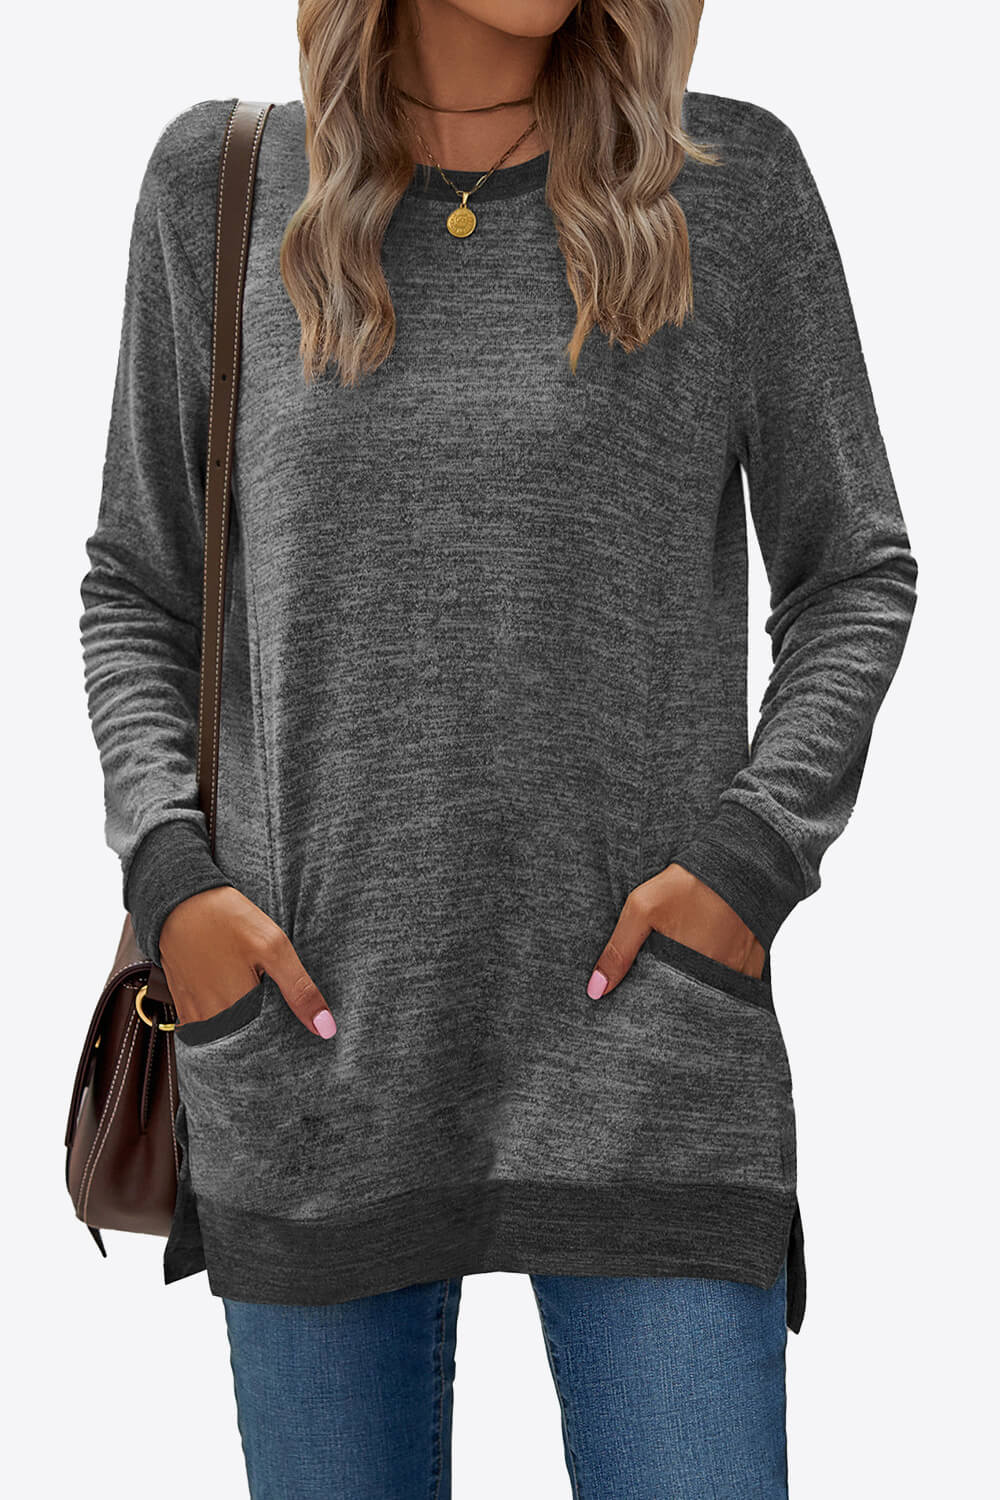 Heathered Slit Top with Pockets - Dark Gray / S - T-Shirts - Shirts & Tops - 4 - 2024